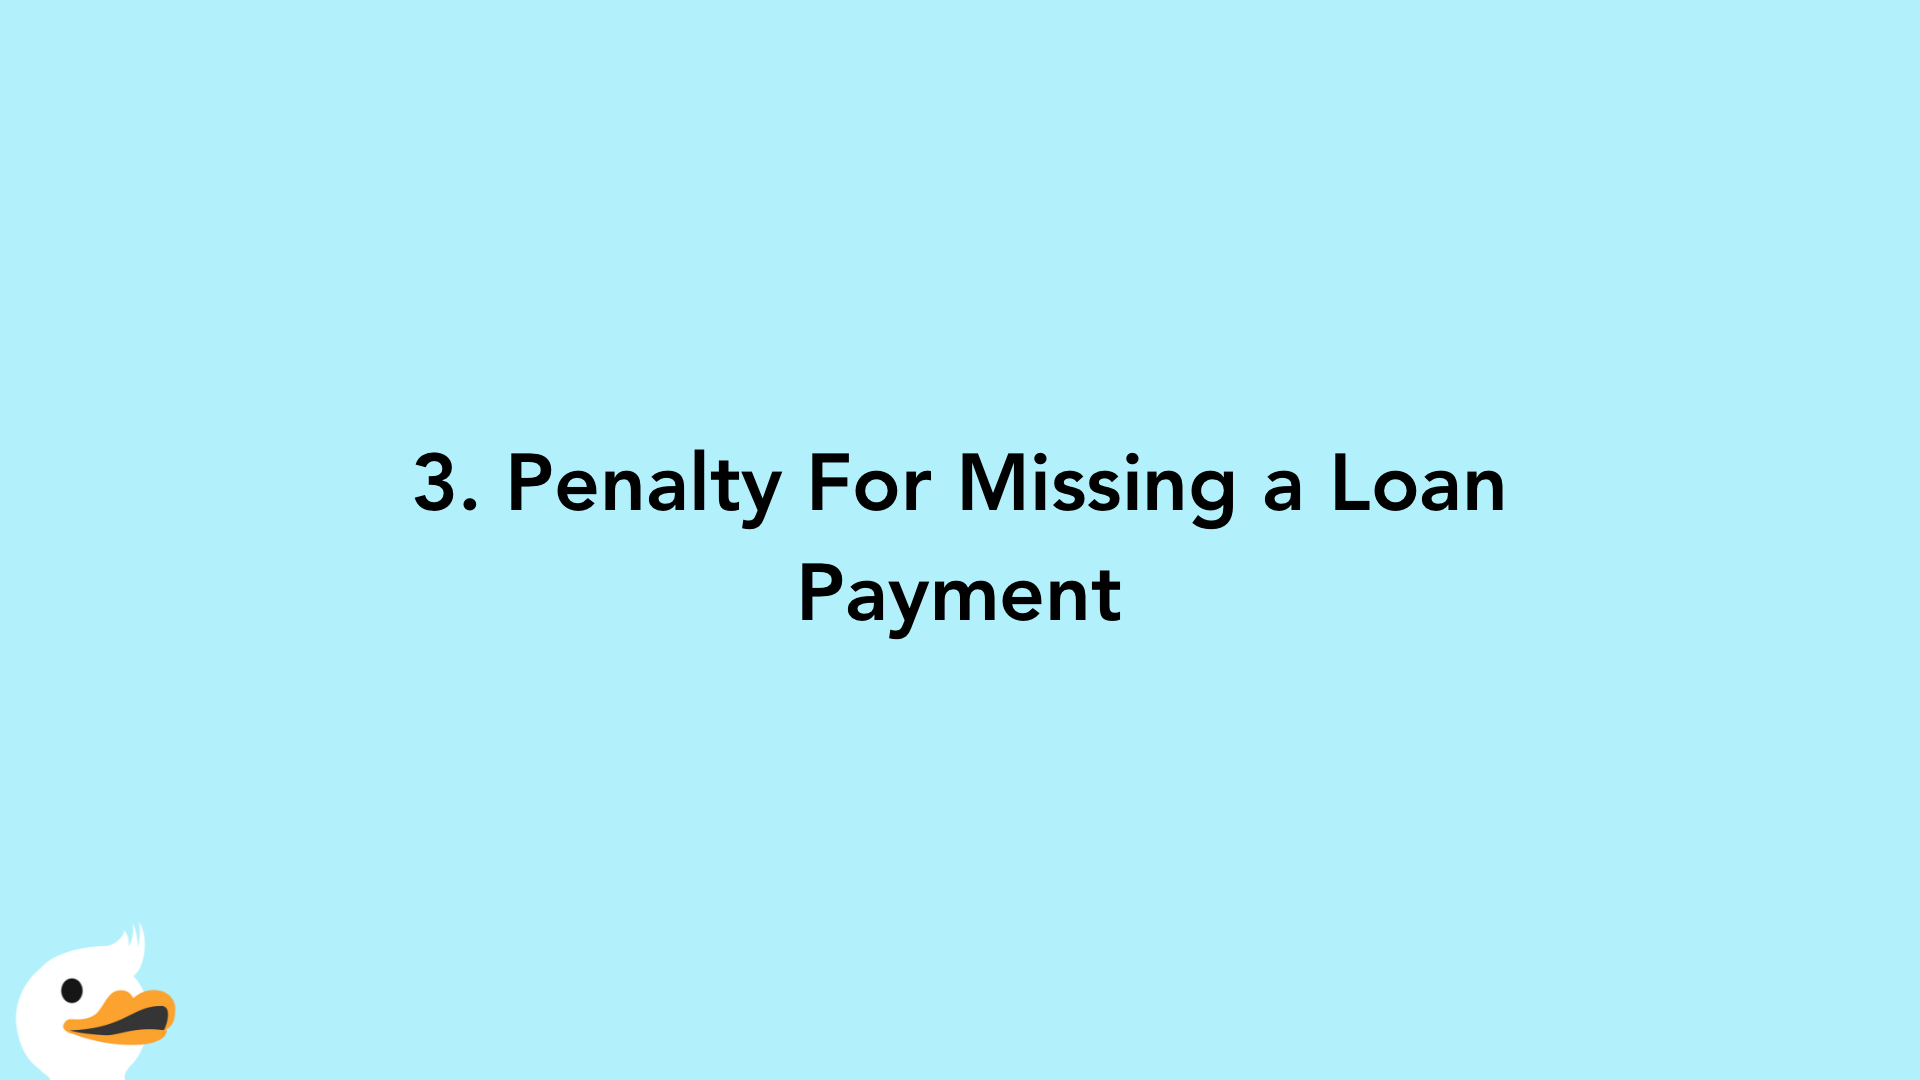 3. Penalty For Missing a Loan Payment